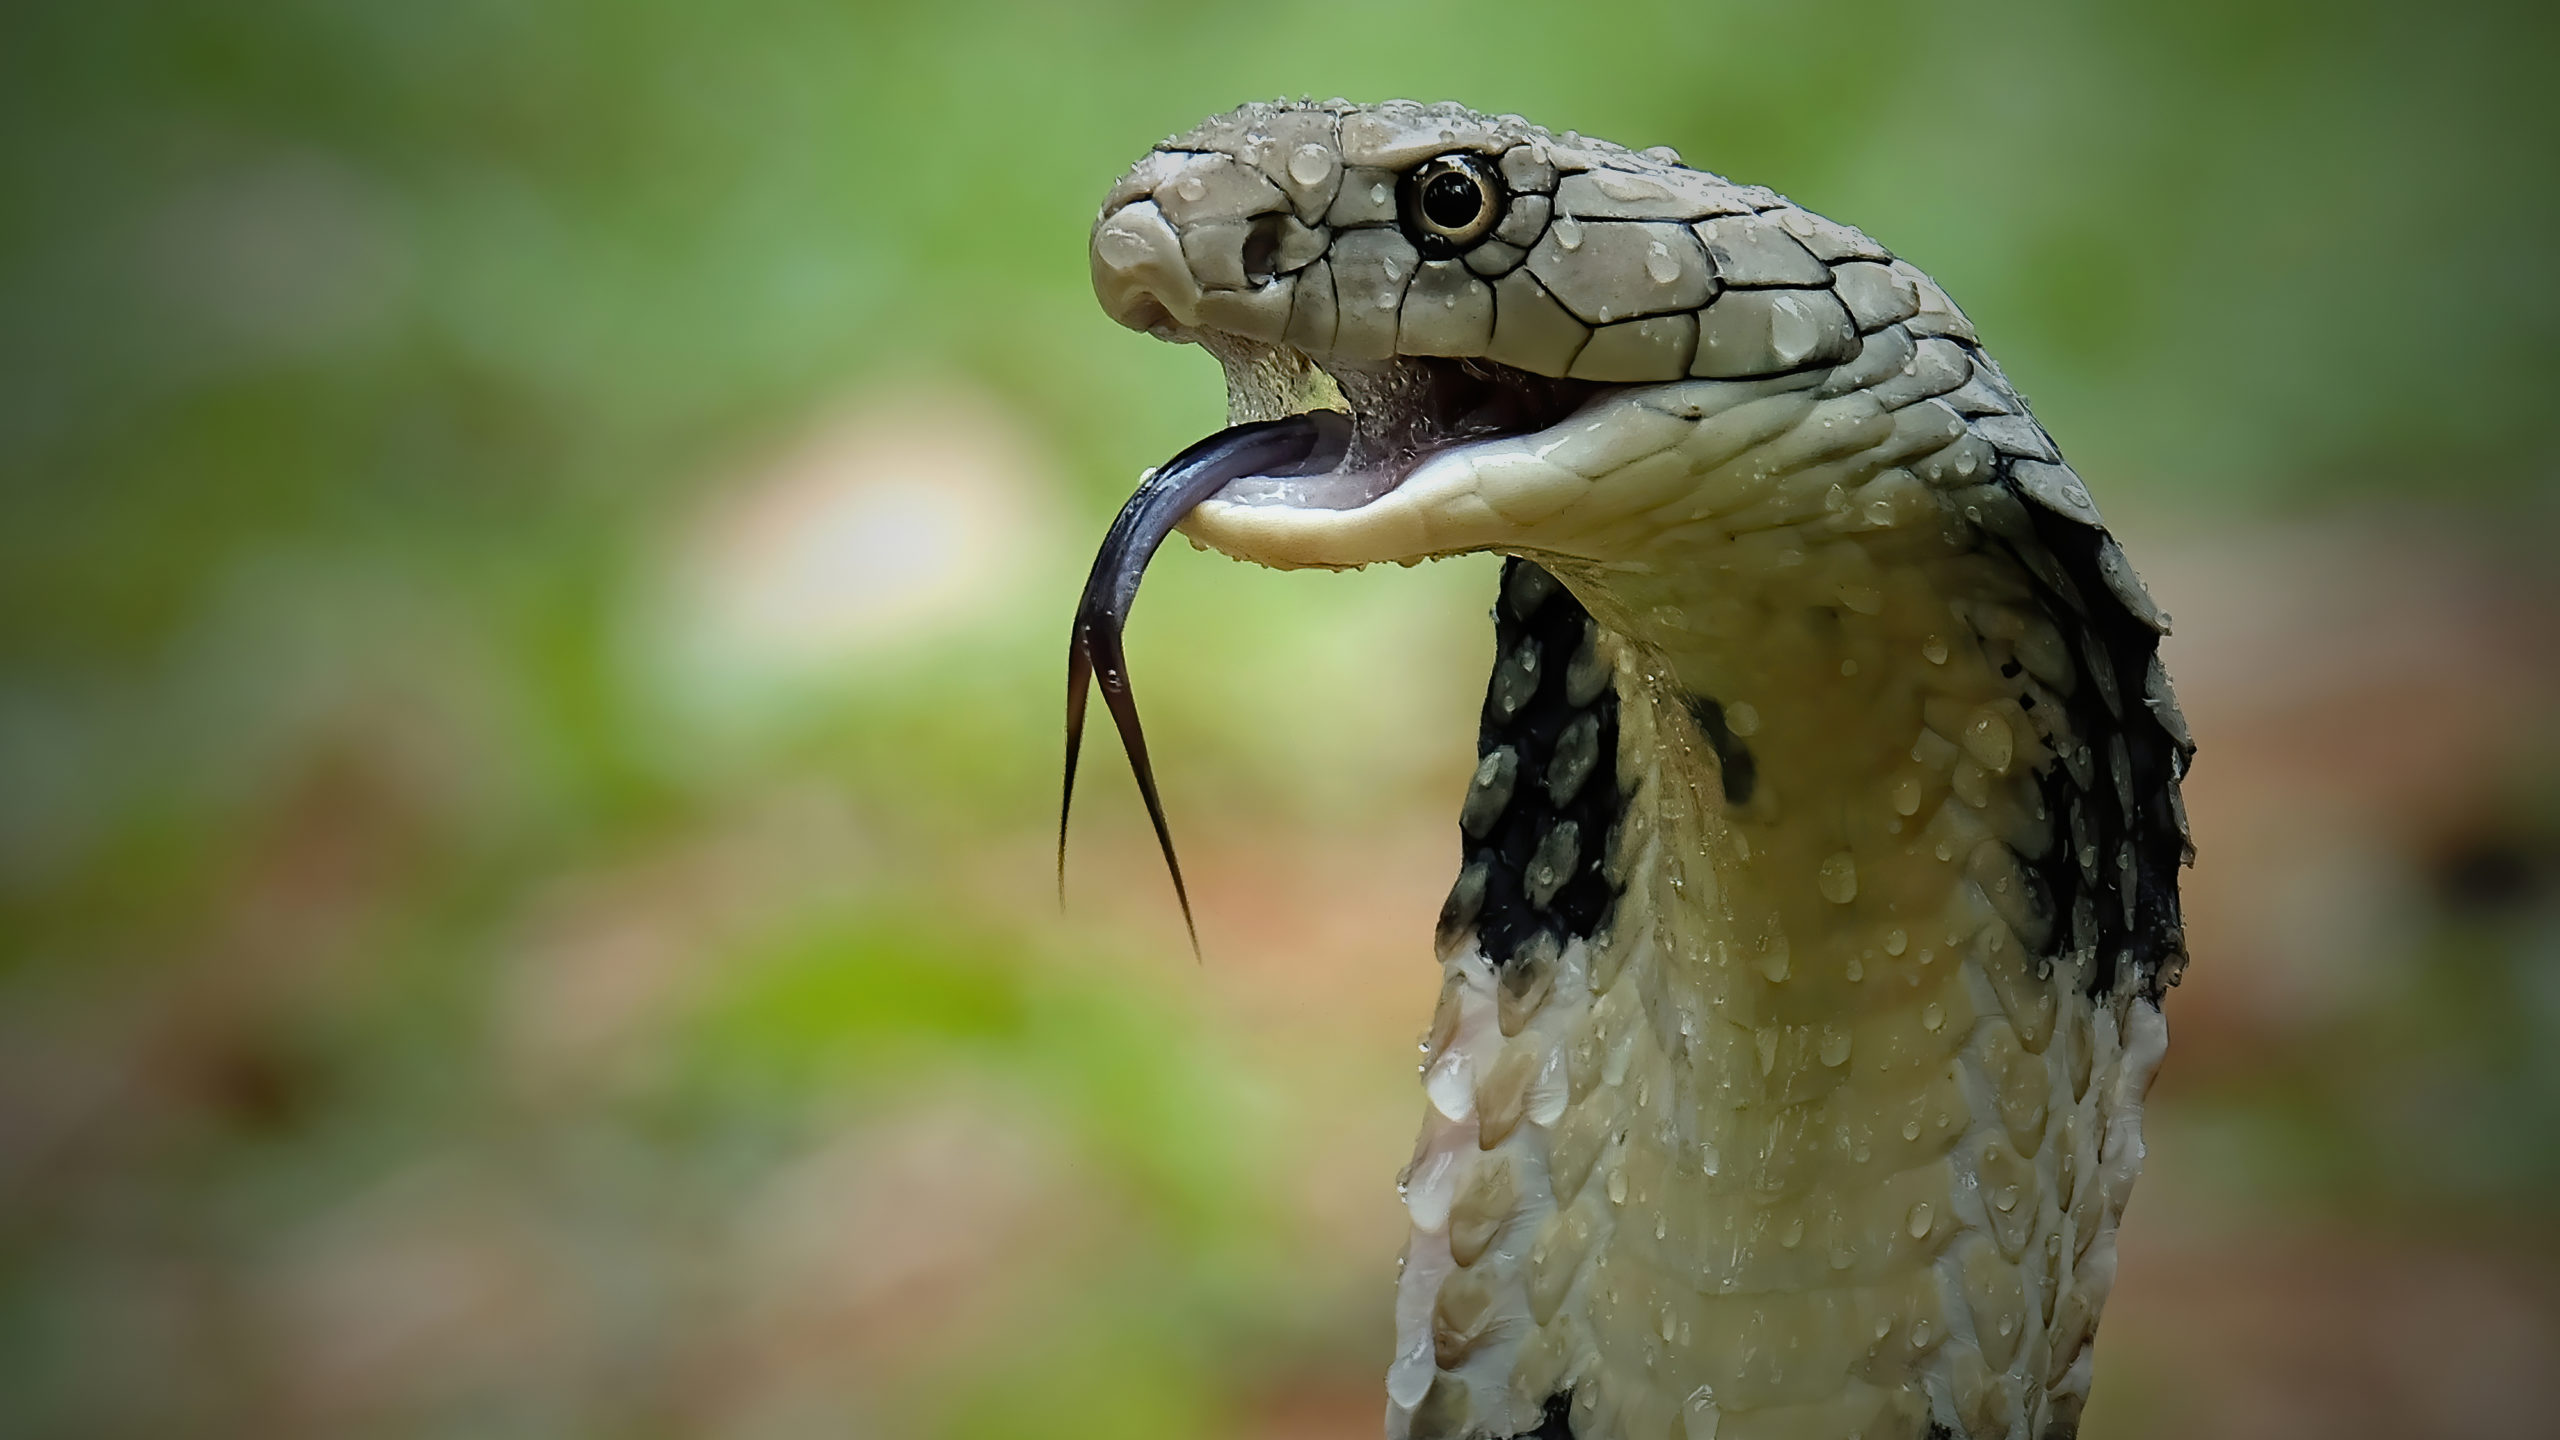 A close up of a king cobra in Indonesia and king cobras are the world's longest venomous snake, wit...